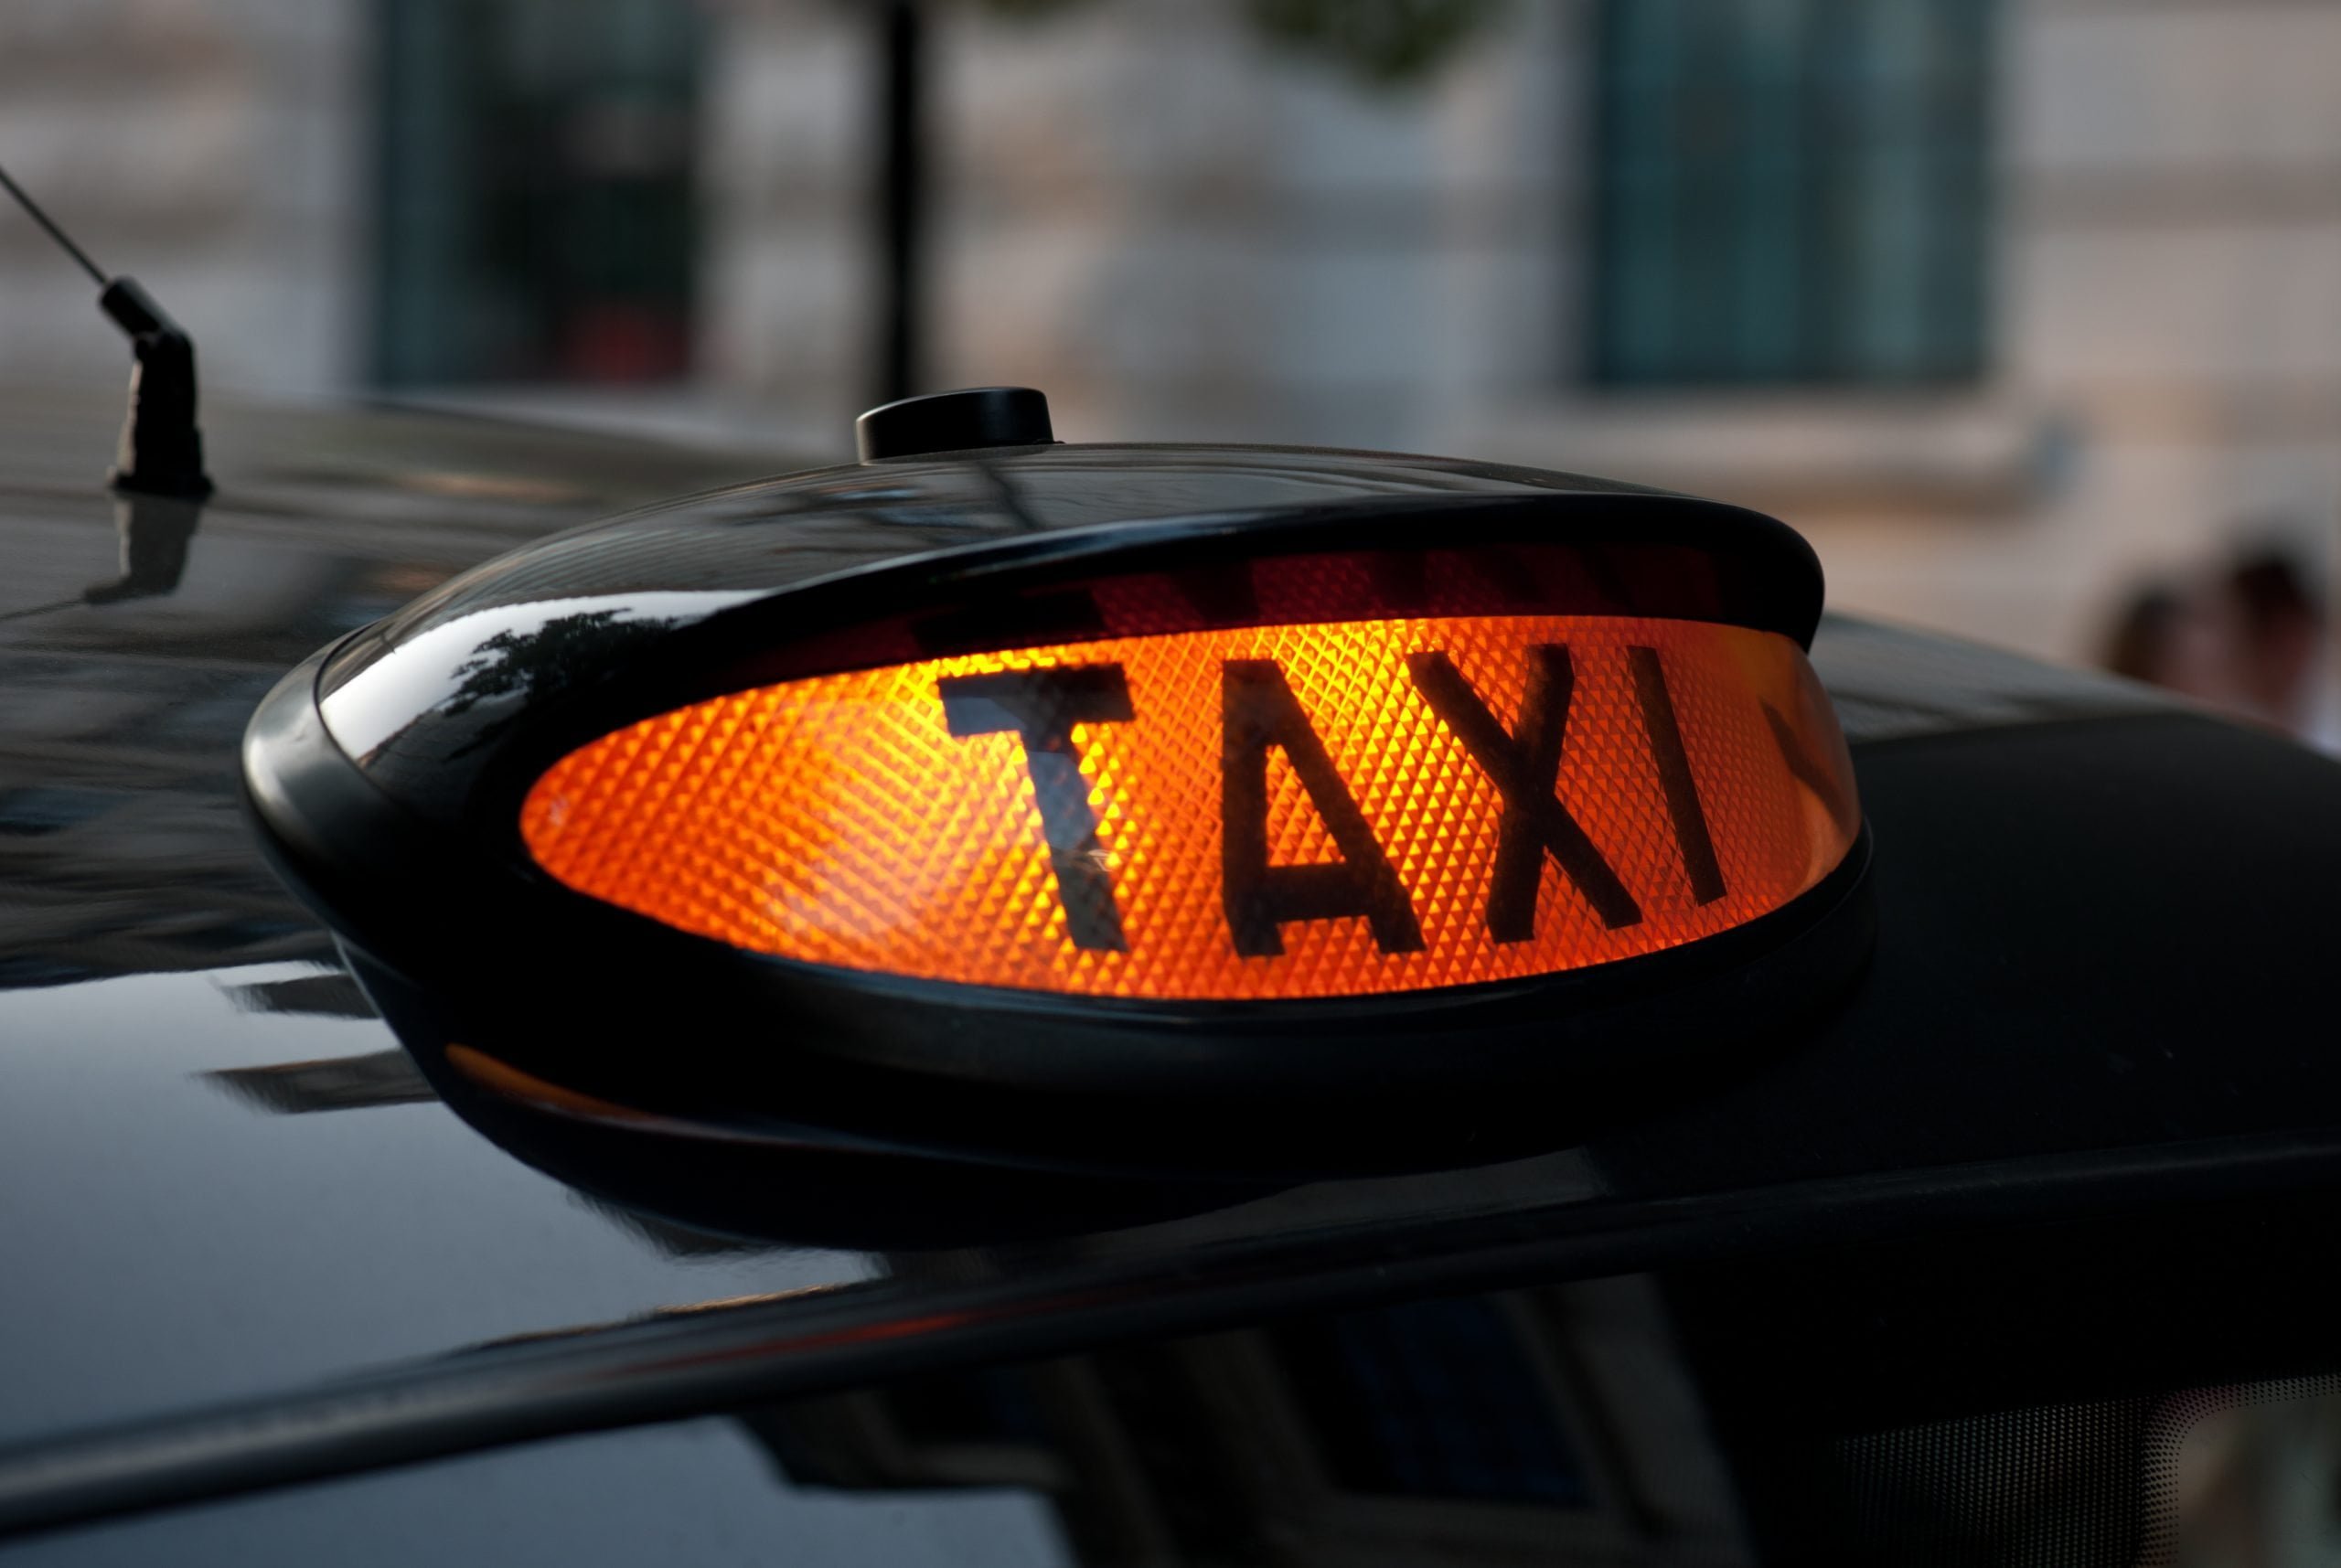 Consultation on draft Private Hire and Hackney Carriage Licensing Policy